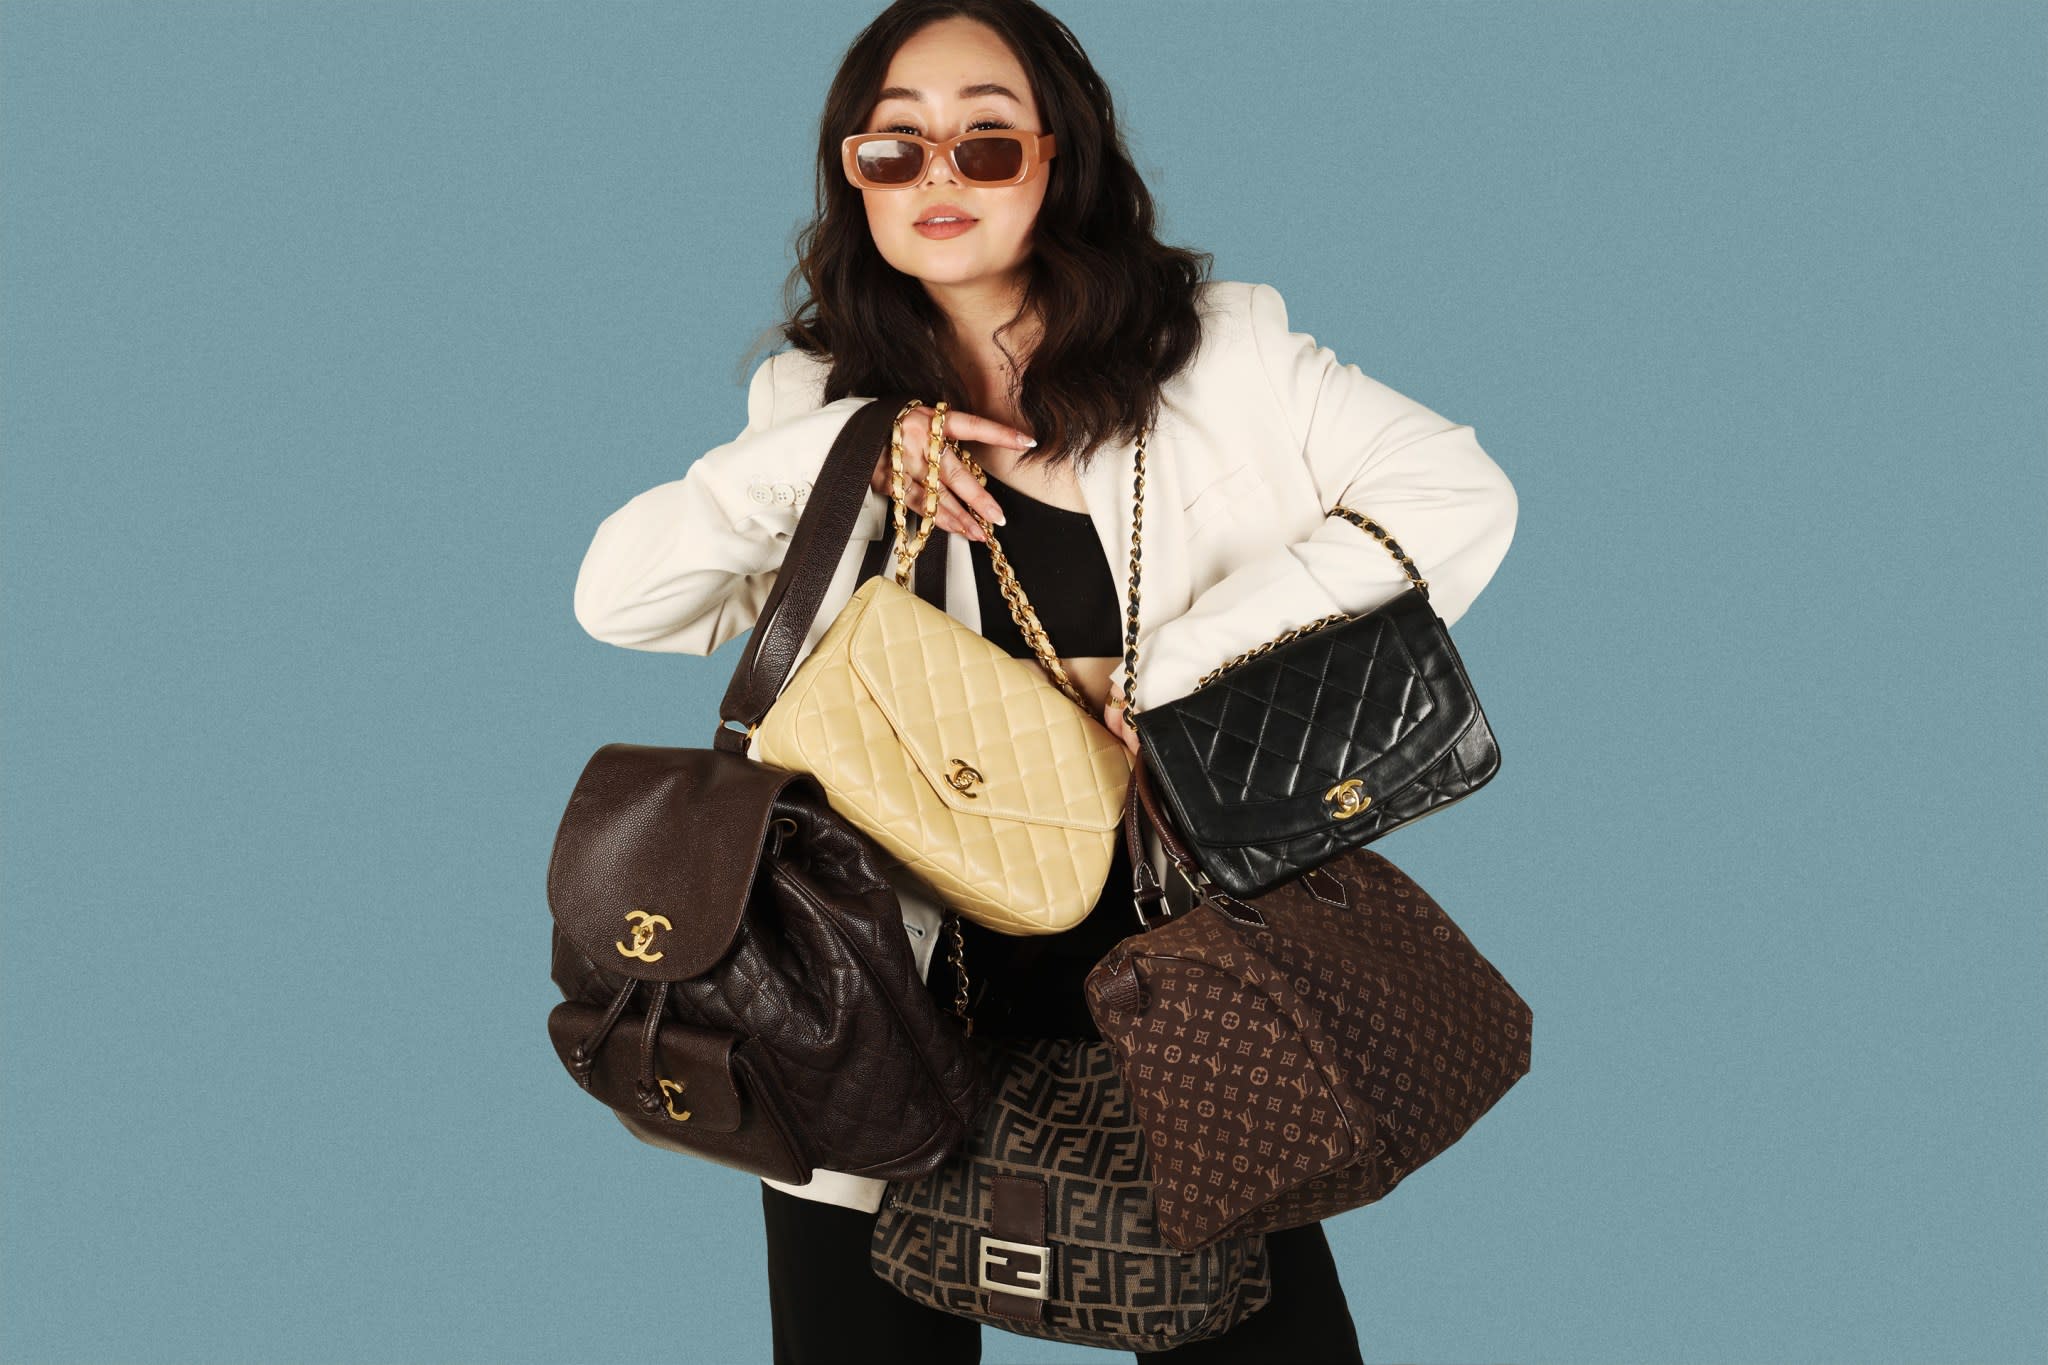 Brown leather bags will be everywhere this fall, and Coach Outlet has the  best at up to 70% off